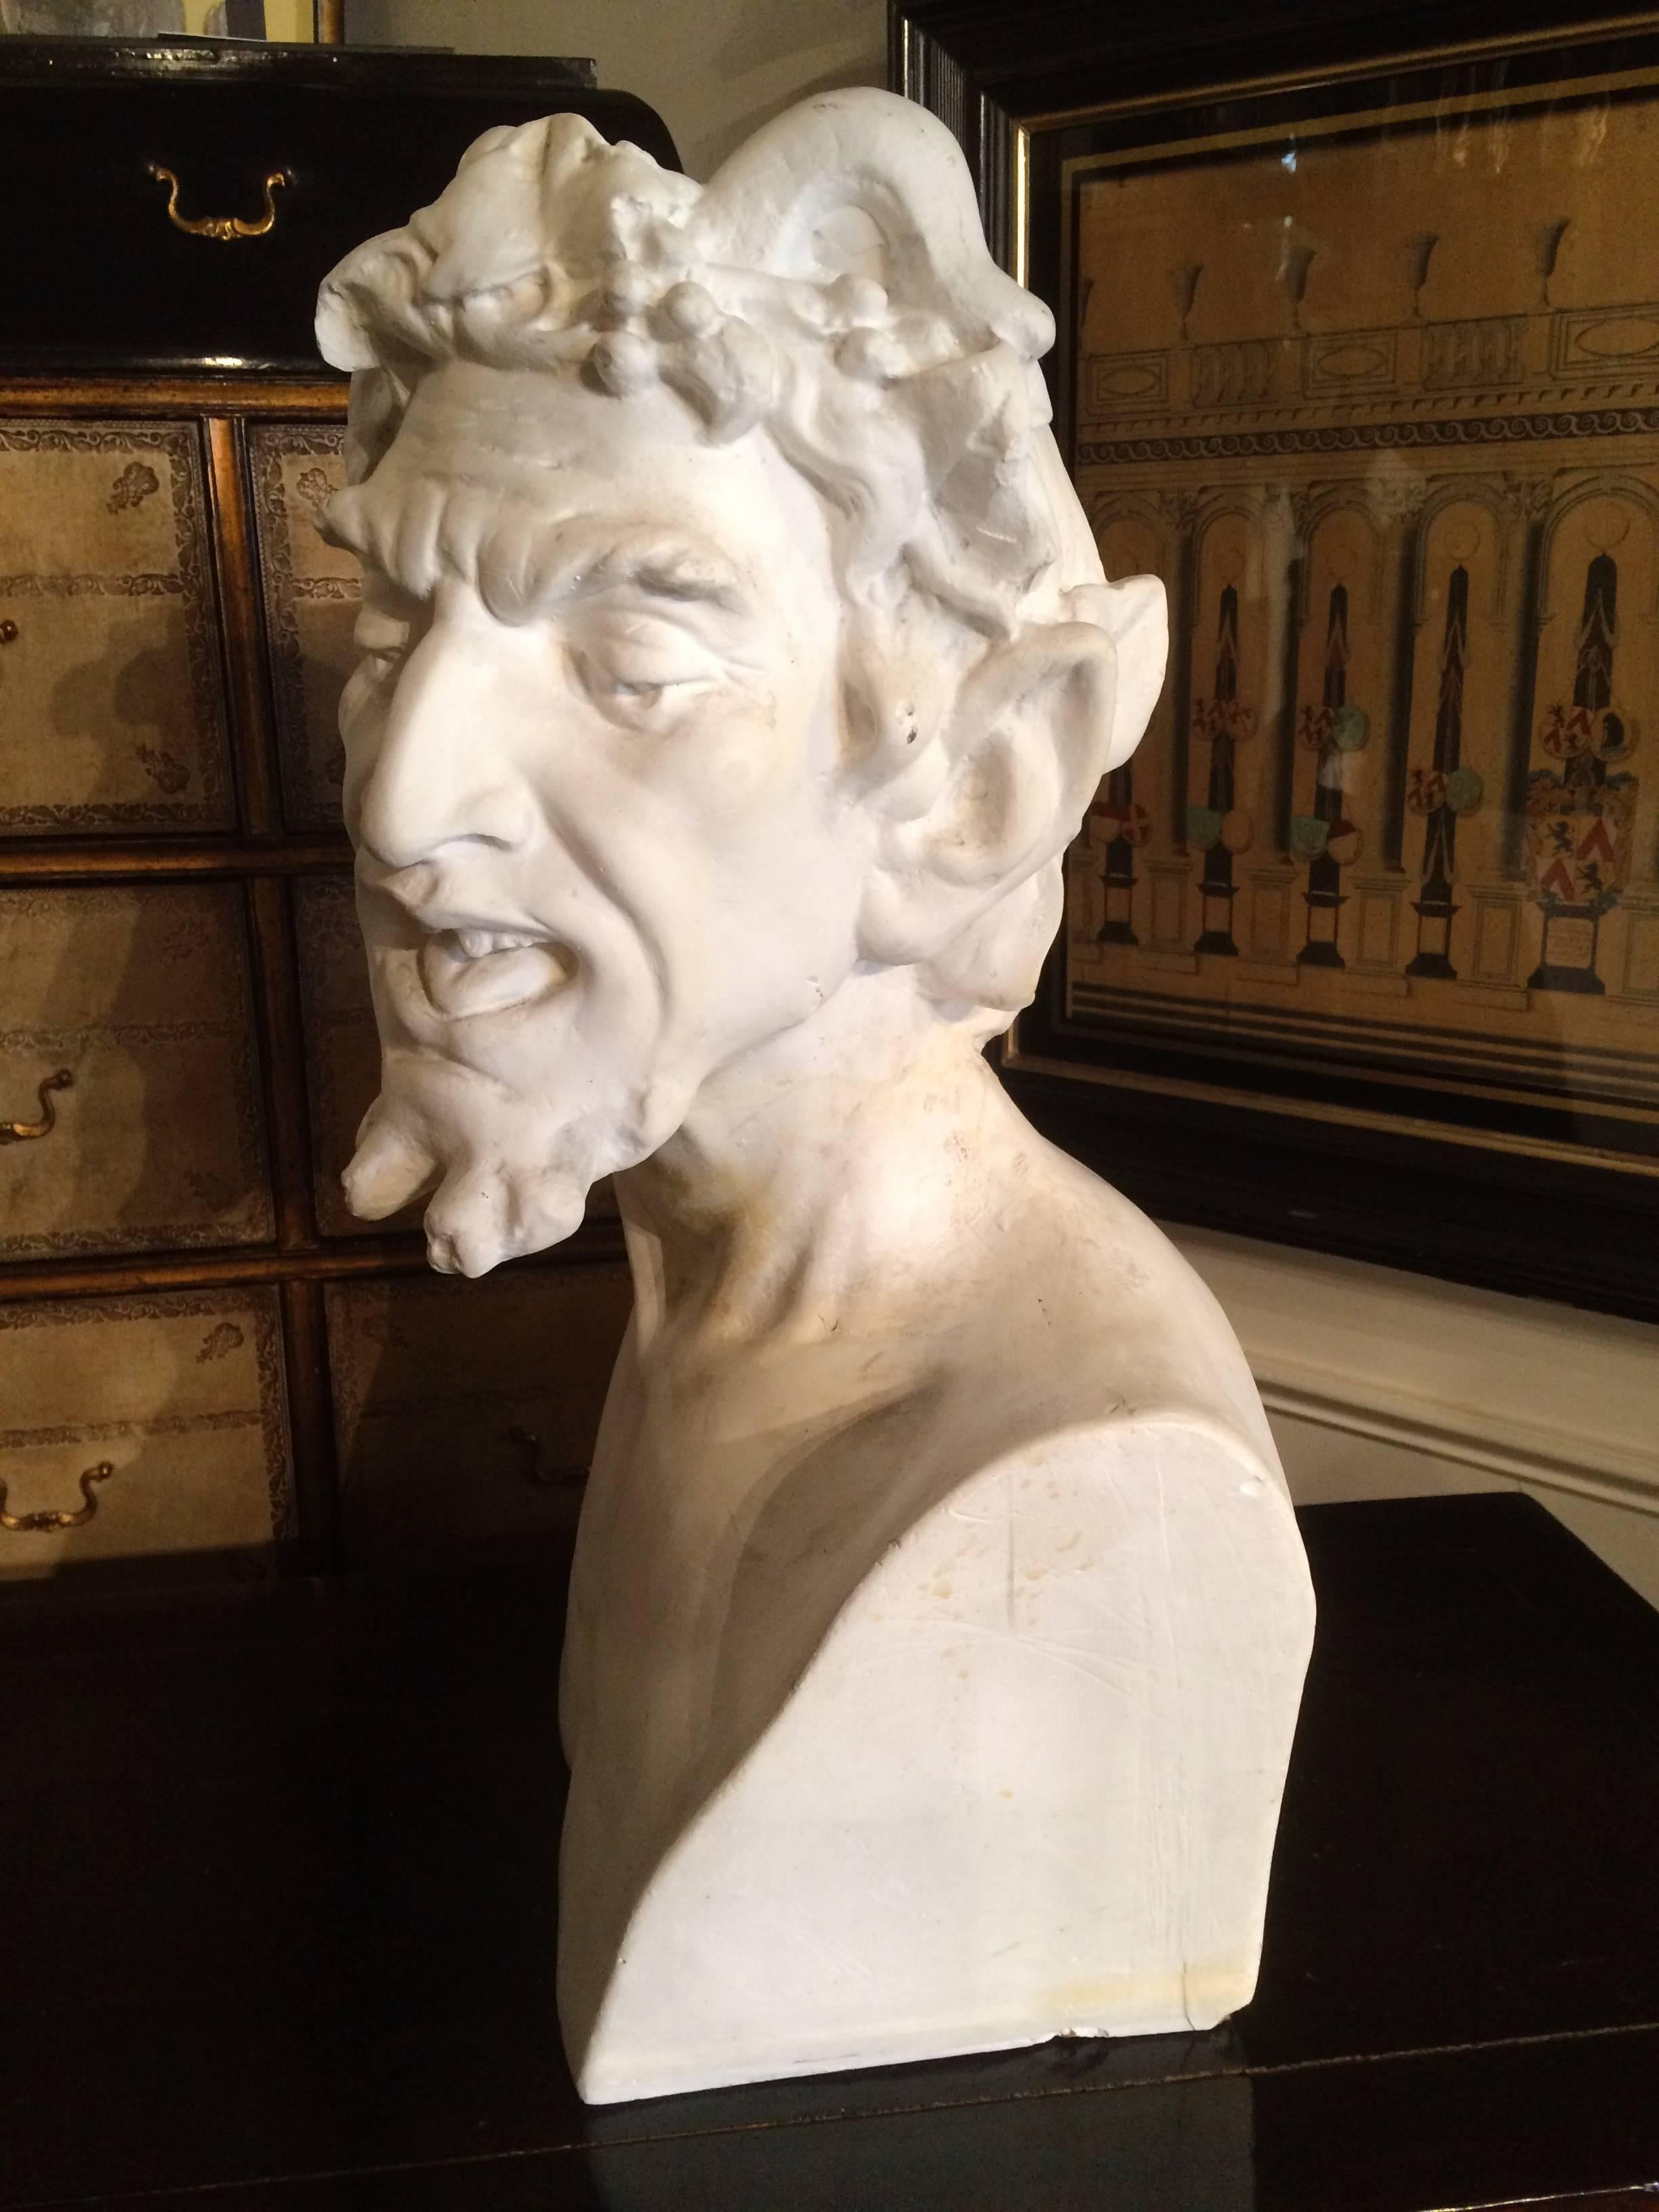 Vintage Italian plaster bust of Pan, after a Roman marble original. 
Pan is a figure from Greek mythology who was originally a pastoral god from Arcadia. He was believed to dwell in the mountains and forests of Greece and was considered the patron